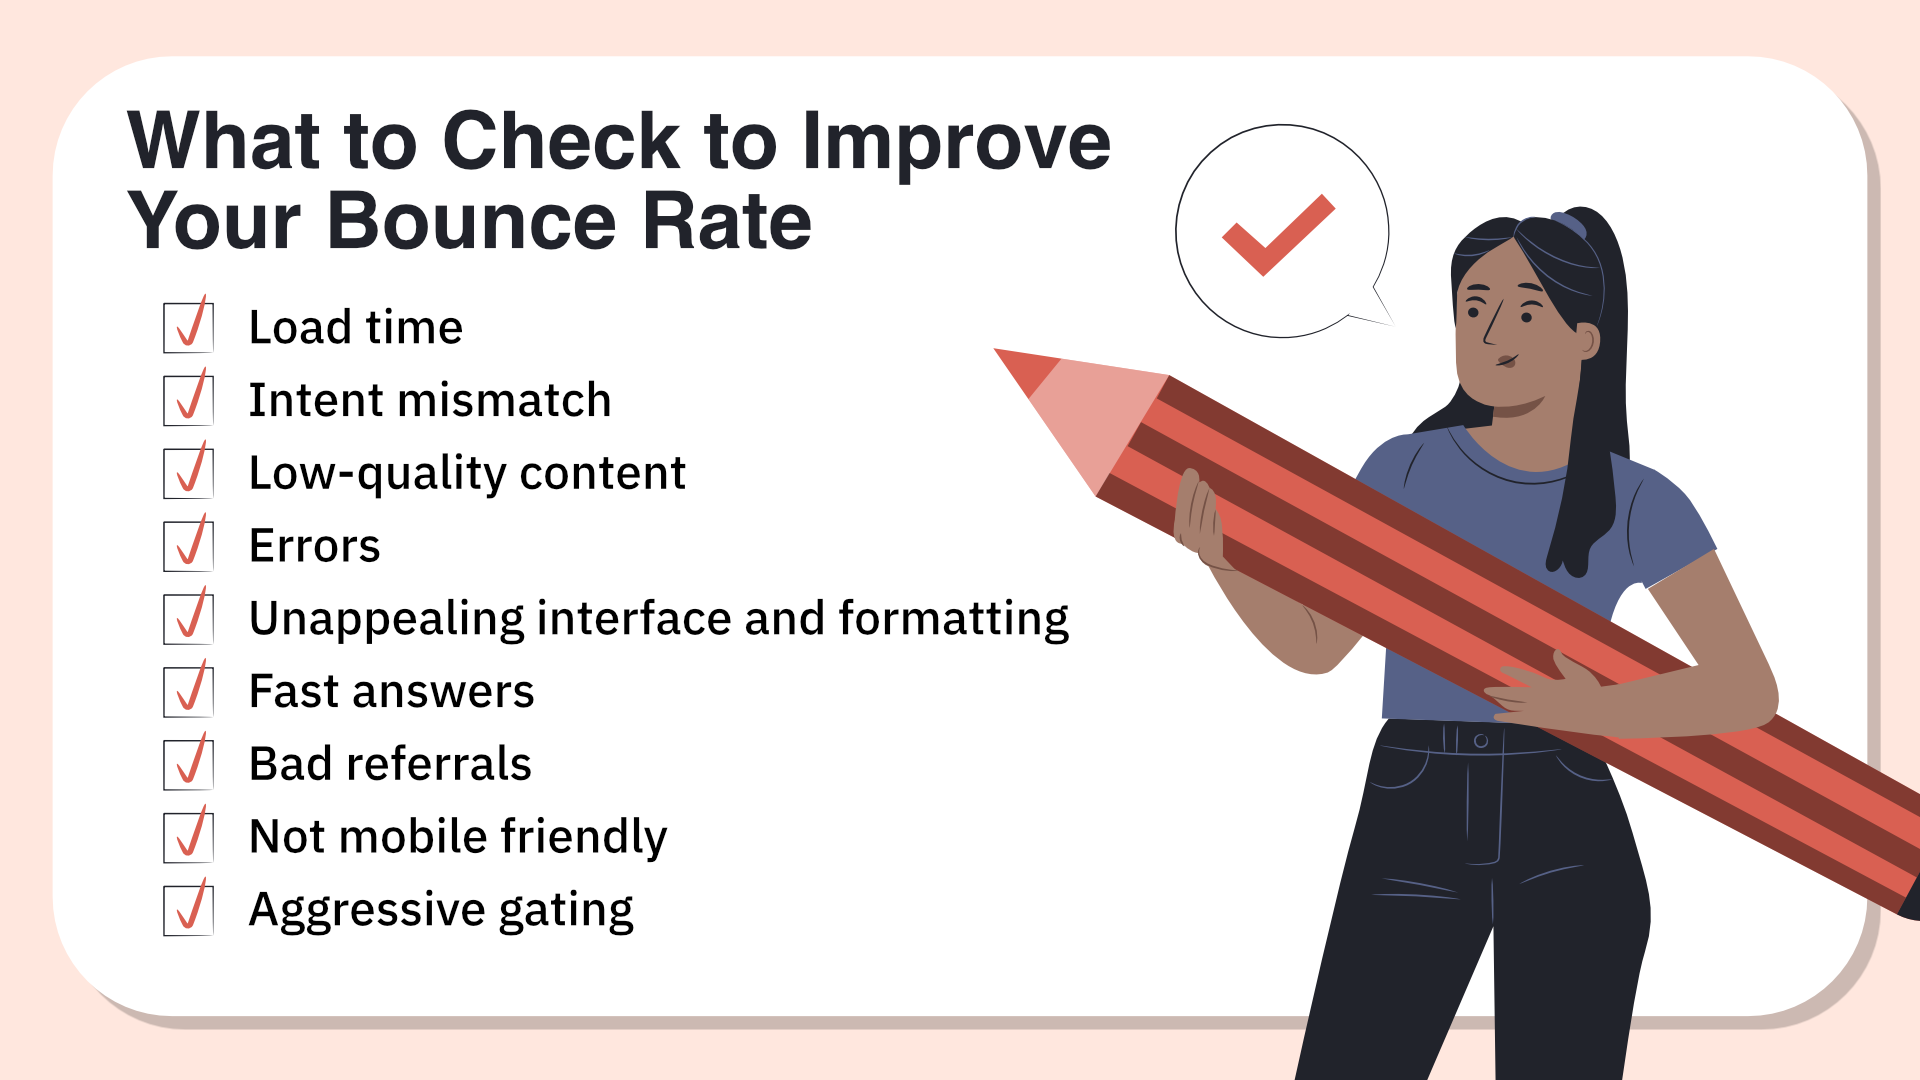 A checklist for improving bounce rate